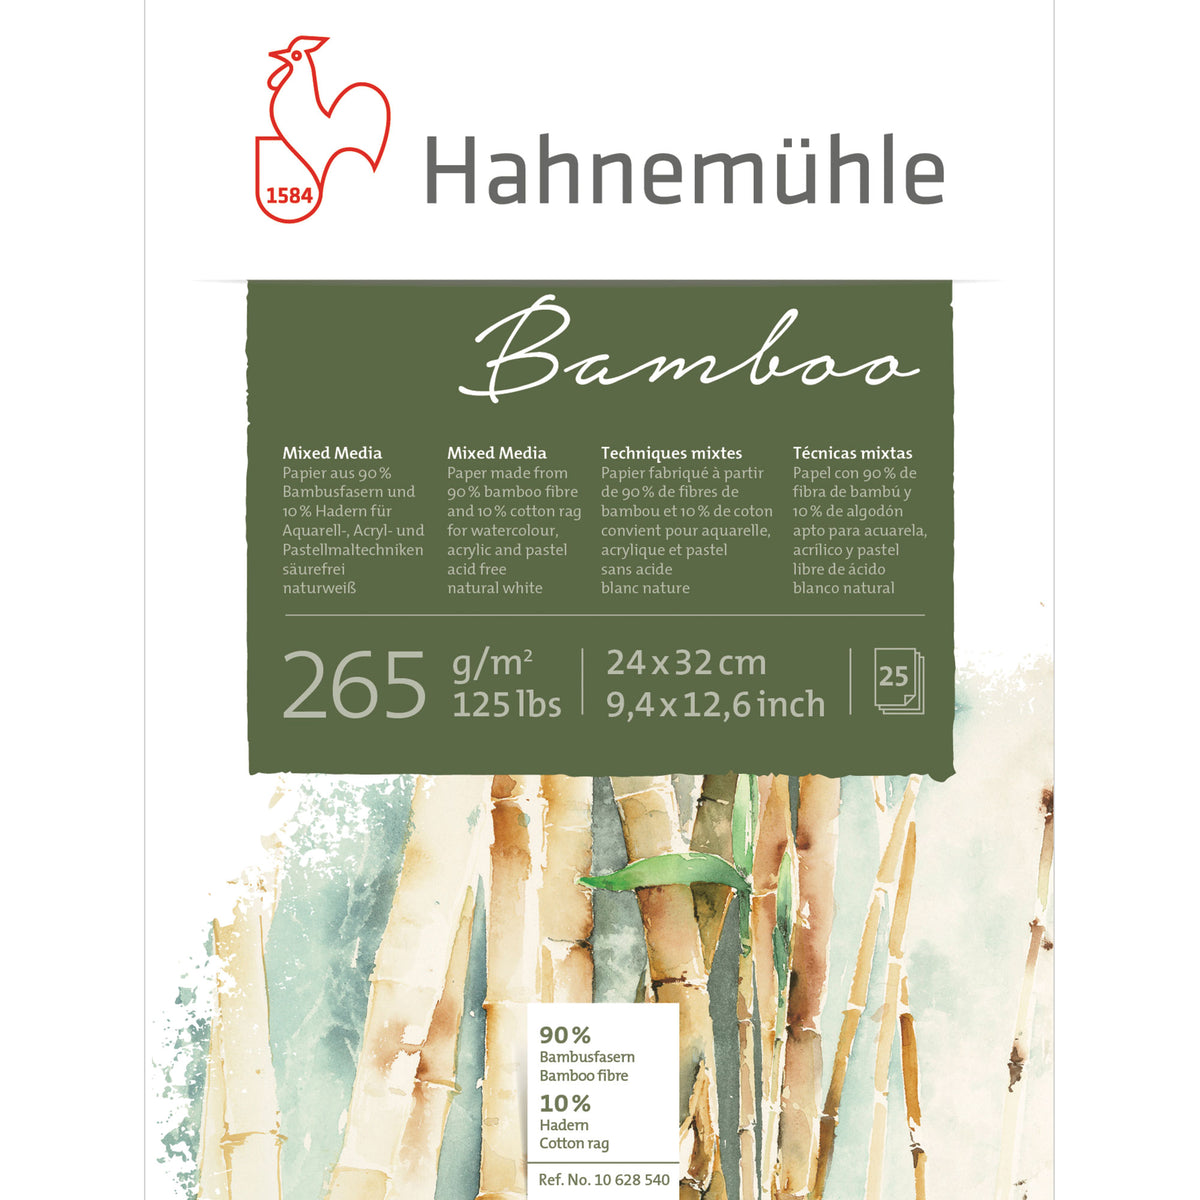 Hahnemühle Bamboo Mixed Media Paper Pads - 24x32cm